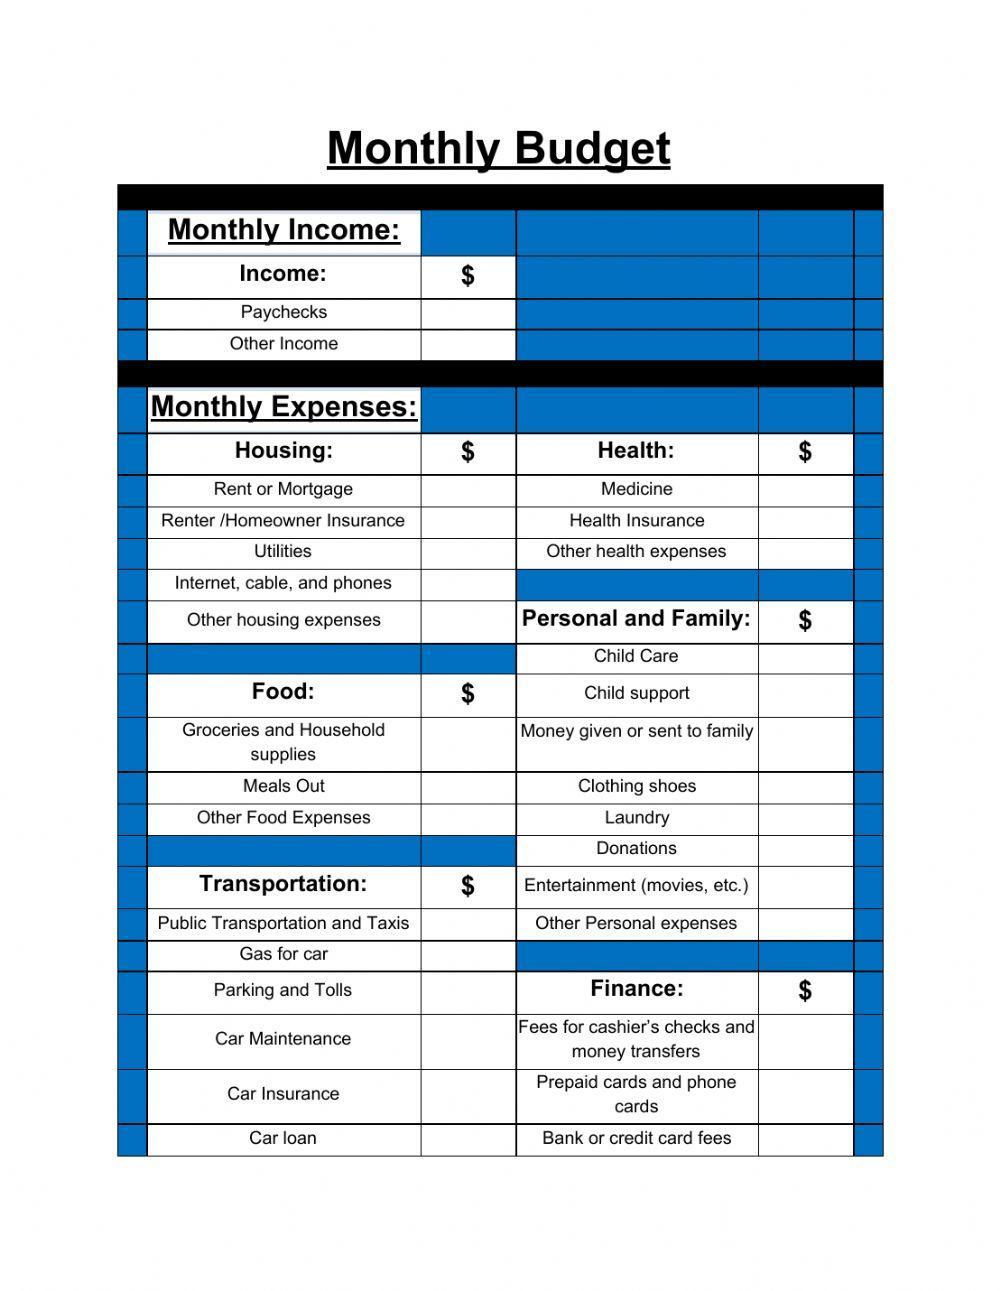 Monthly Budget Sheet with Guide